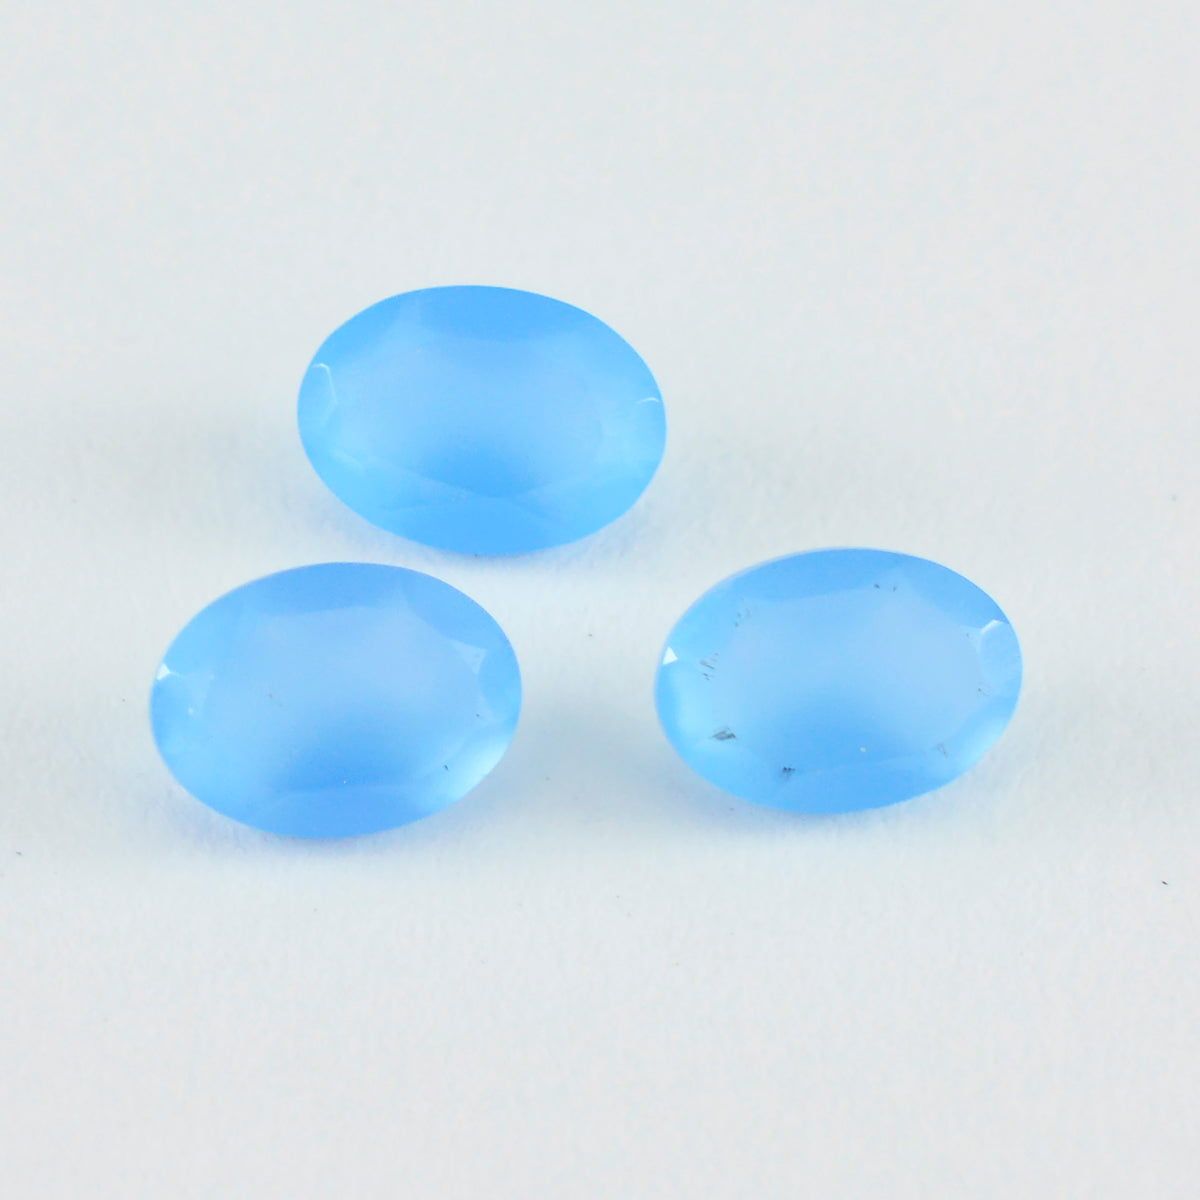 Riyogems 1PC Natural Blue Chalcedony Faceted 8x10 mm Oval Shape nice-looking Quality Gem